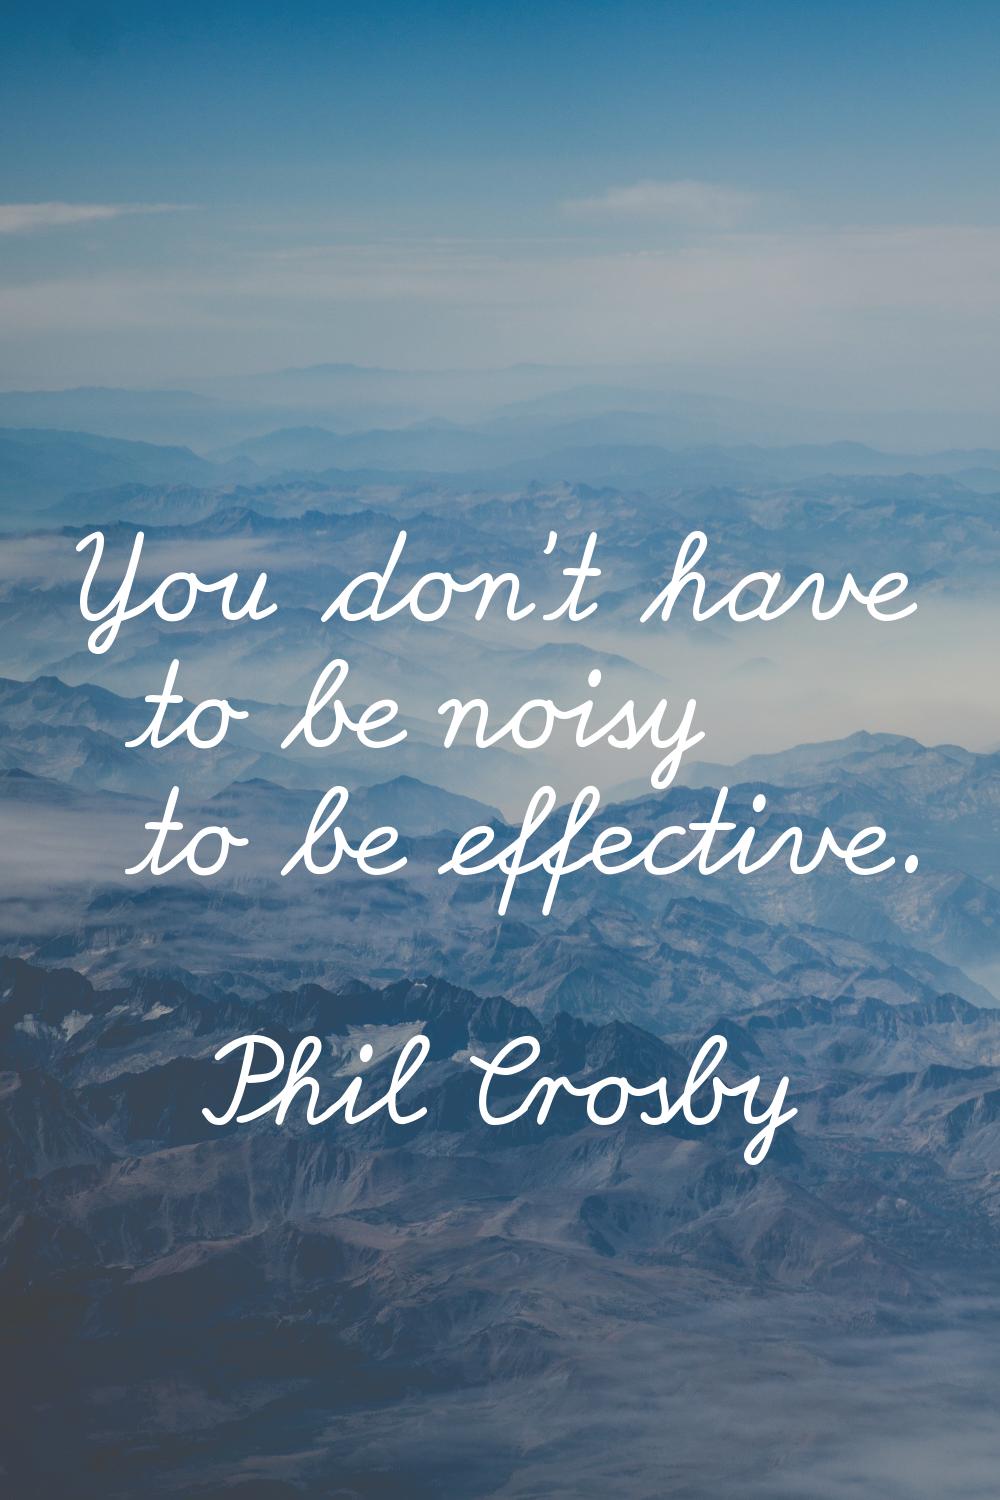 You don't have to be noisy to be effective.